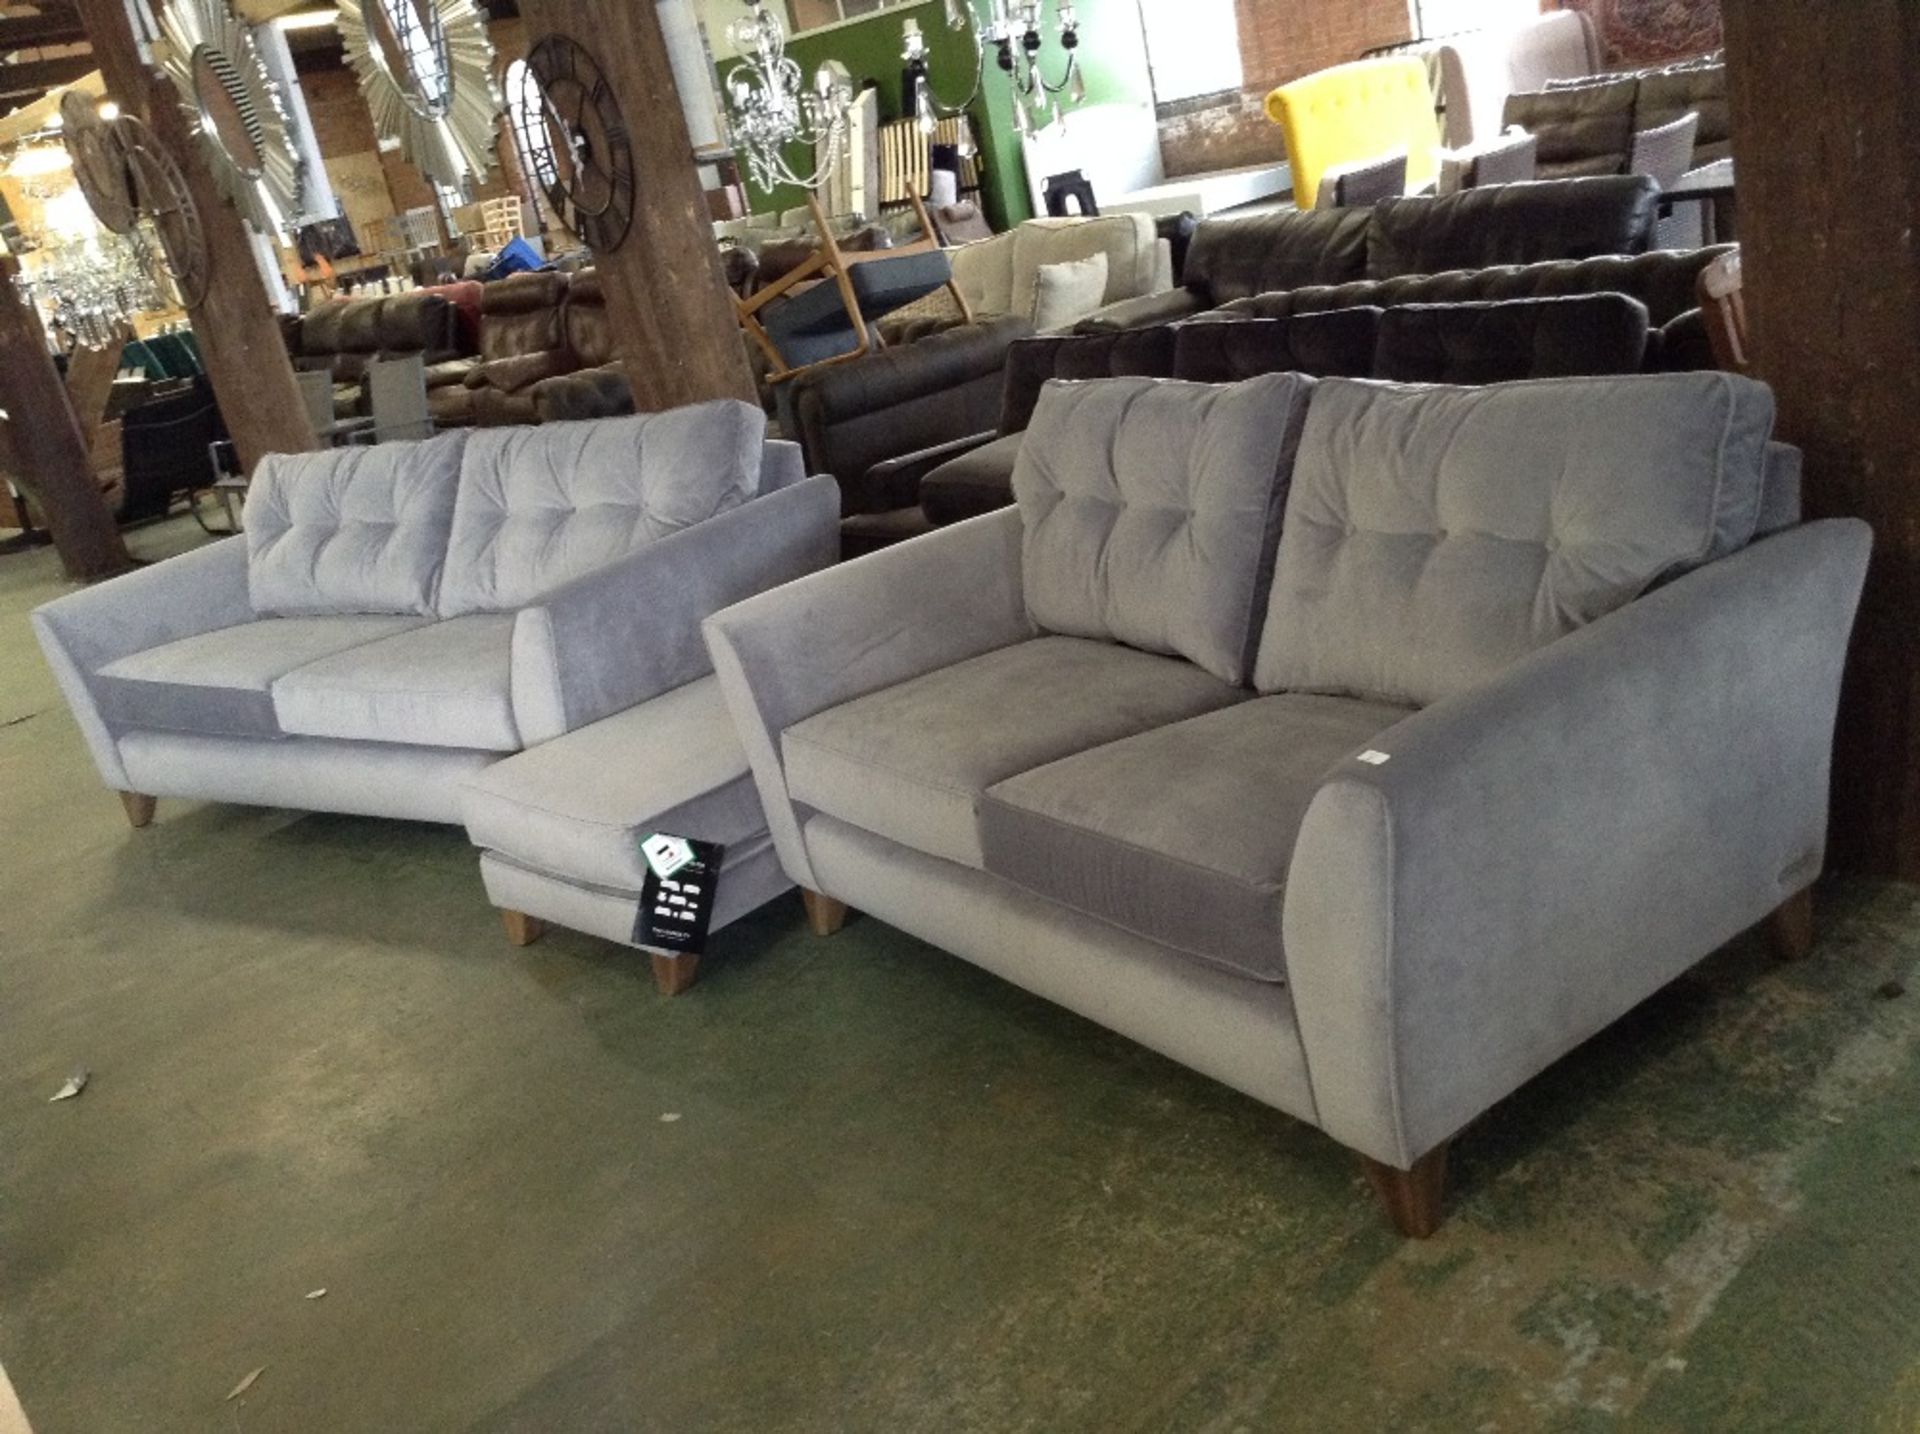 MELODY GREY FABRIC 4 SEATER SOFA 2 AND A HALF SEAT